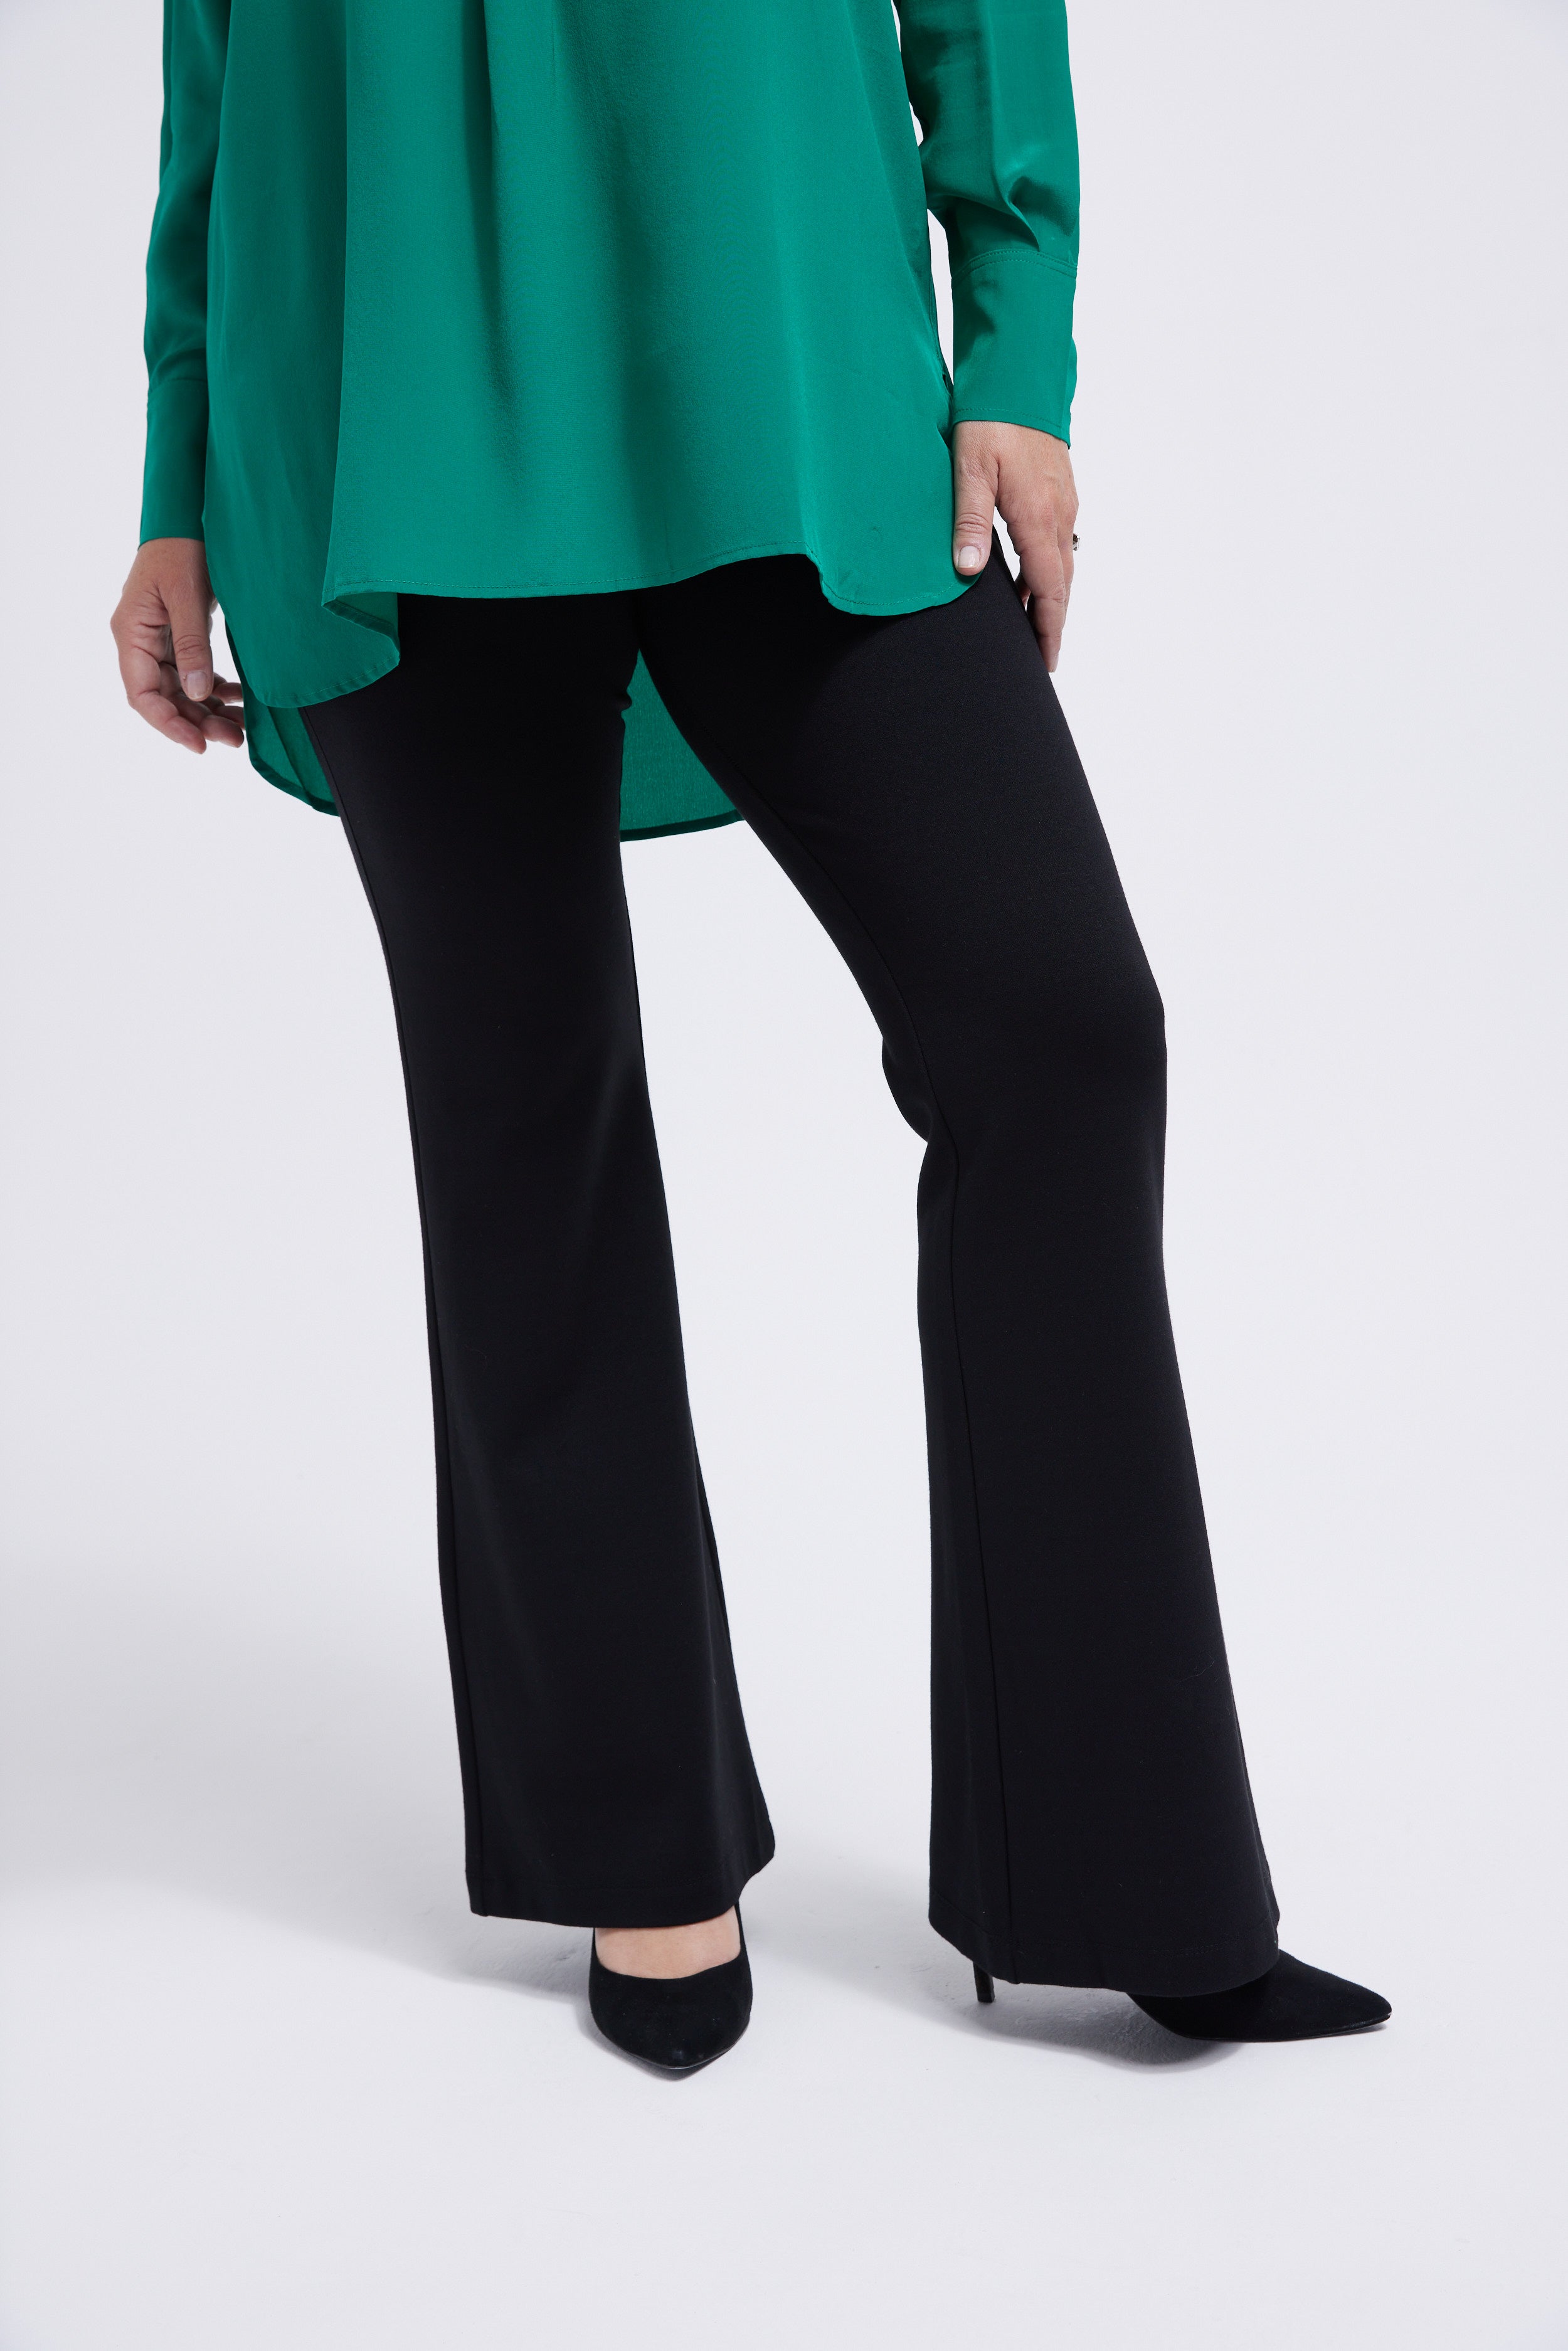 Women's Stretch Trouser- By Rey House –